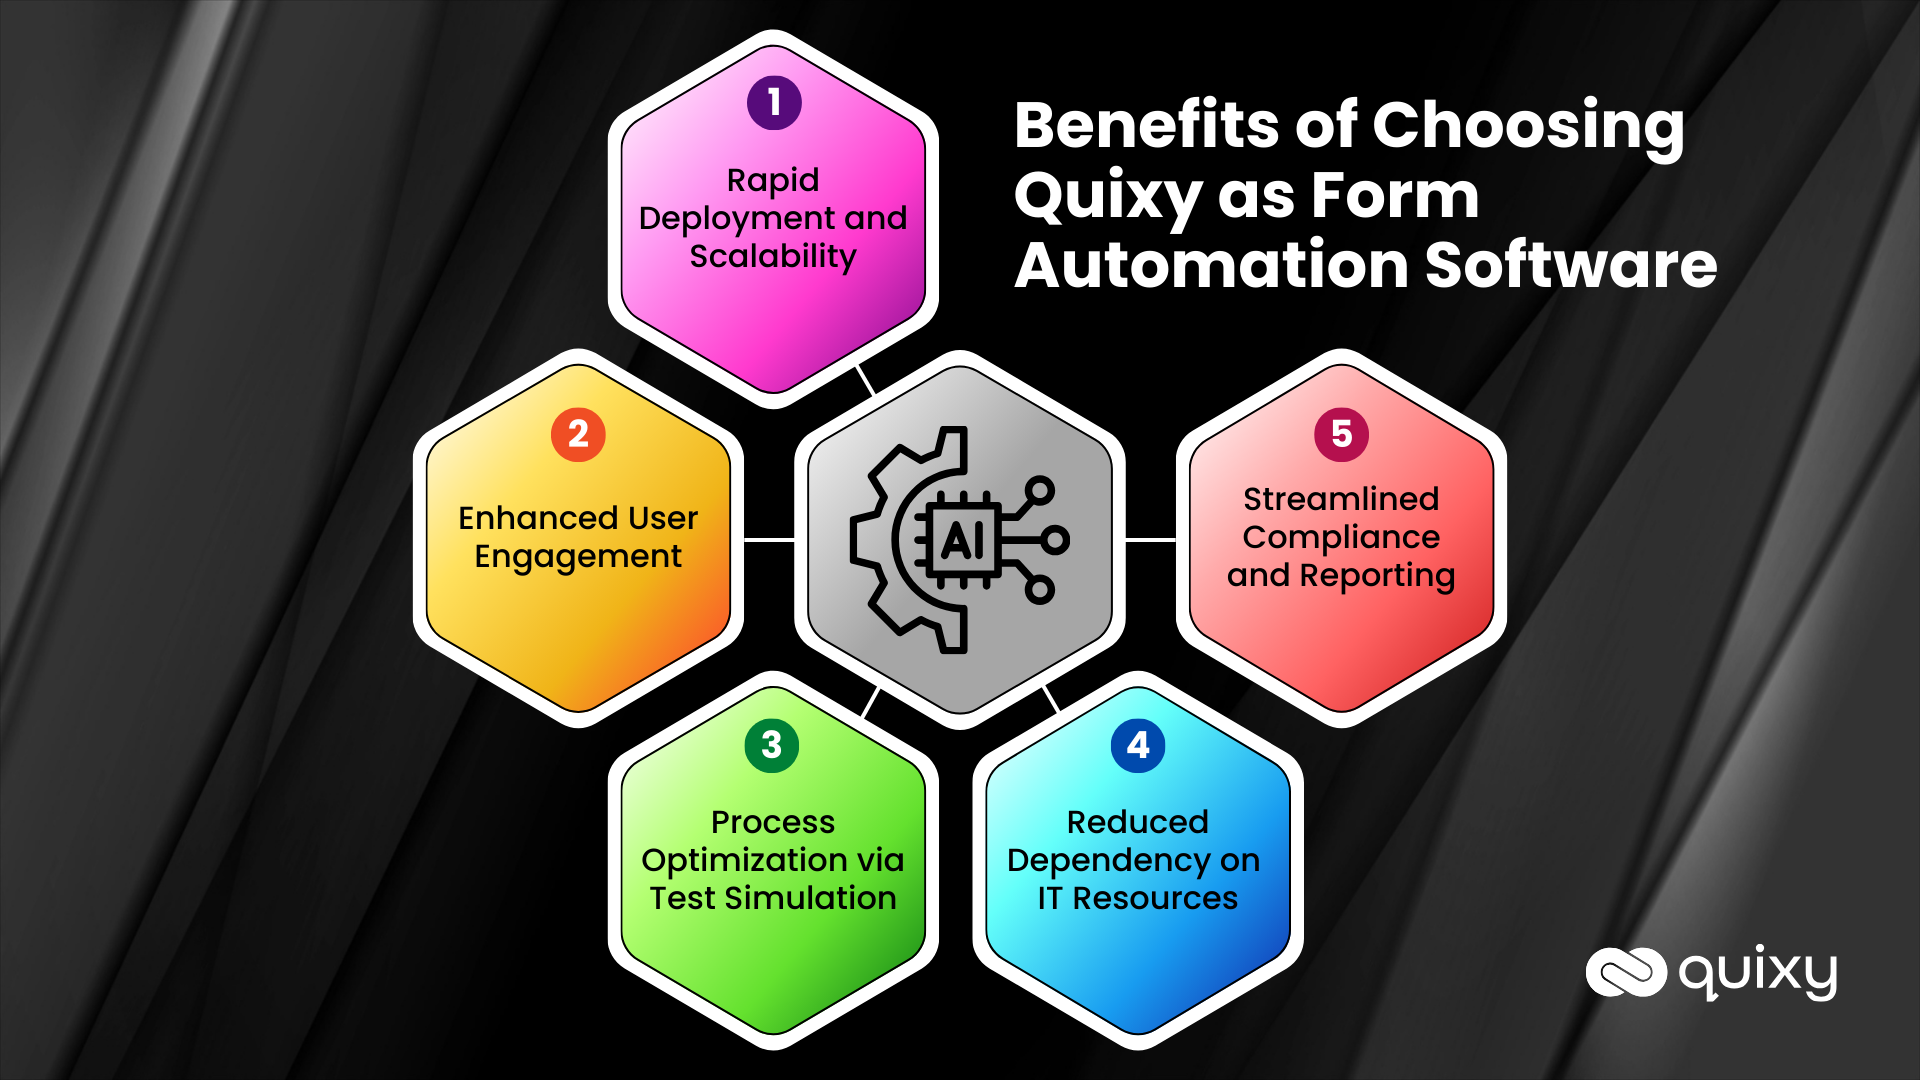 Benefits of Choosing Quixy as Form Automation Software